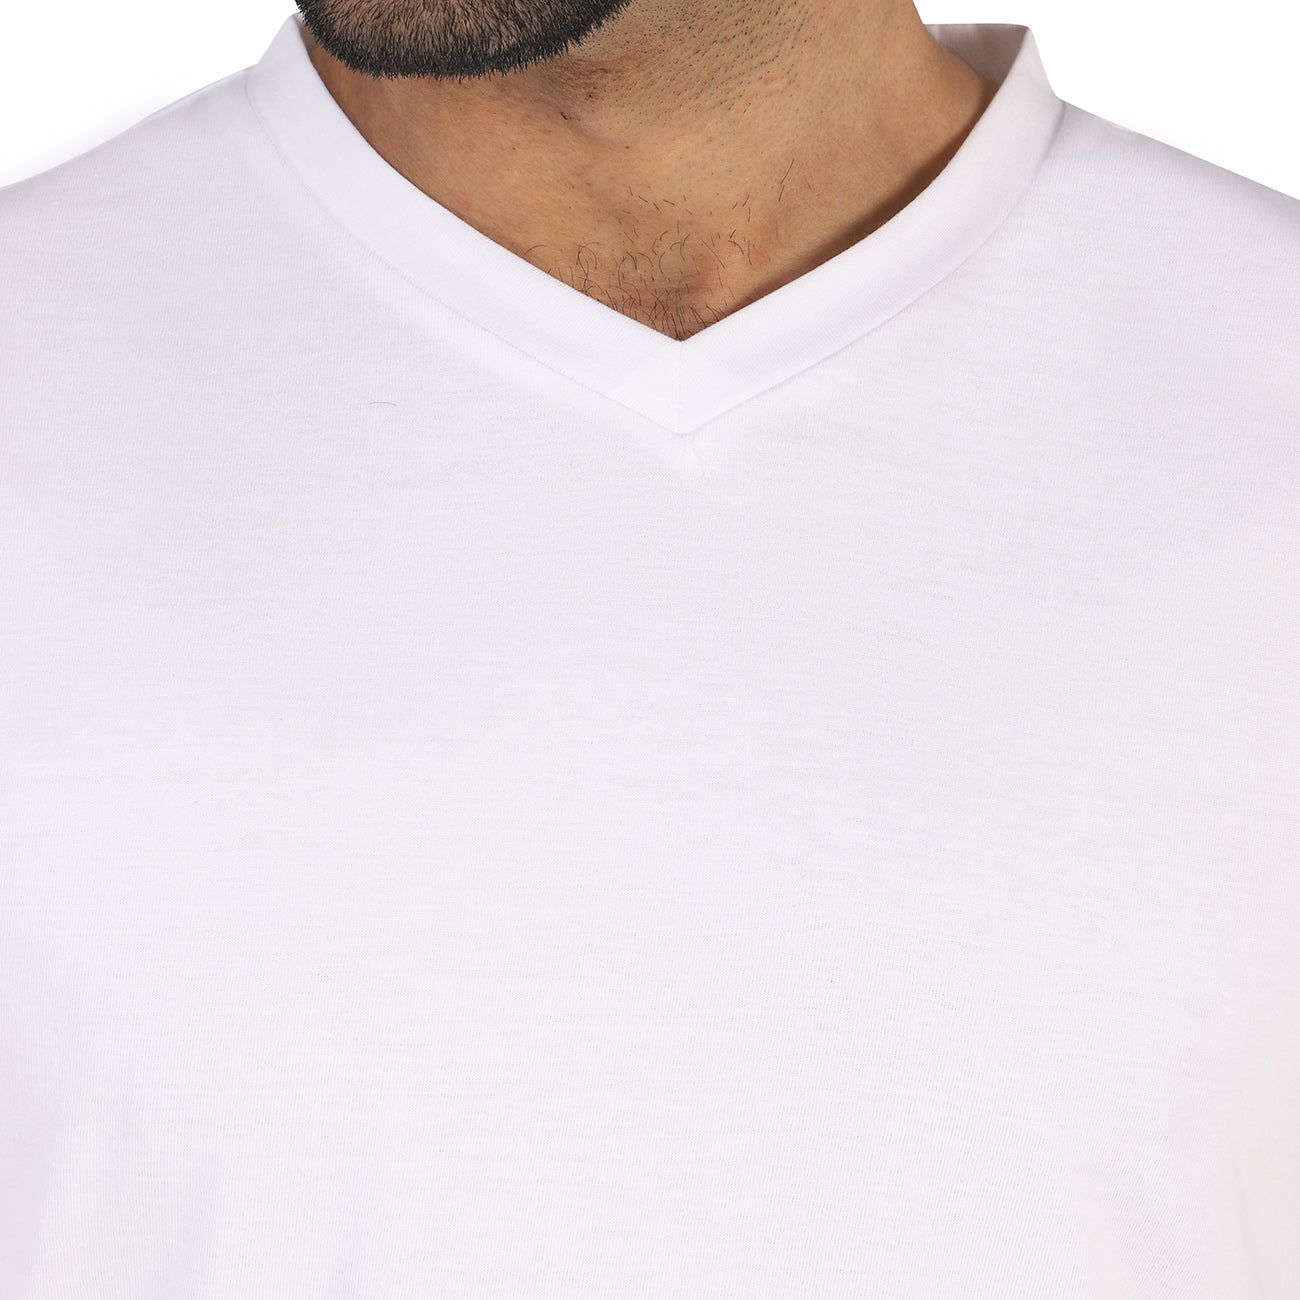 Hyve Sports V-Neck Stand Up V Collar T shirt at Rs 550 in